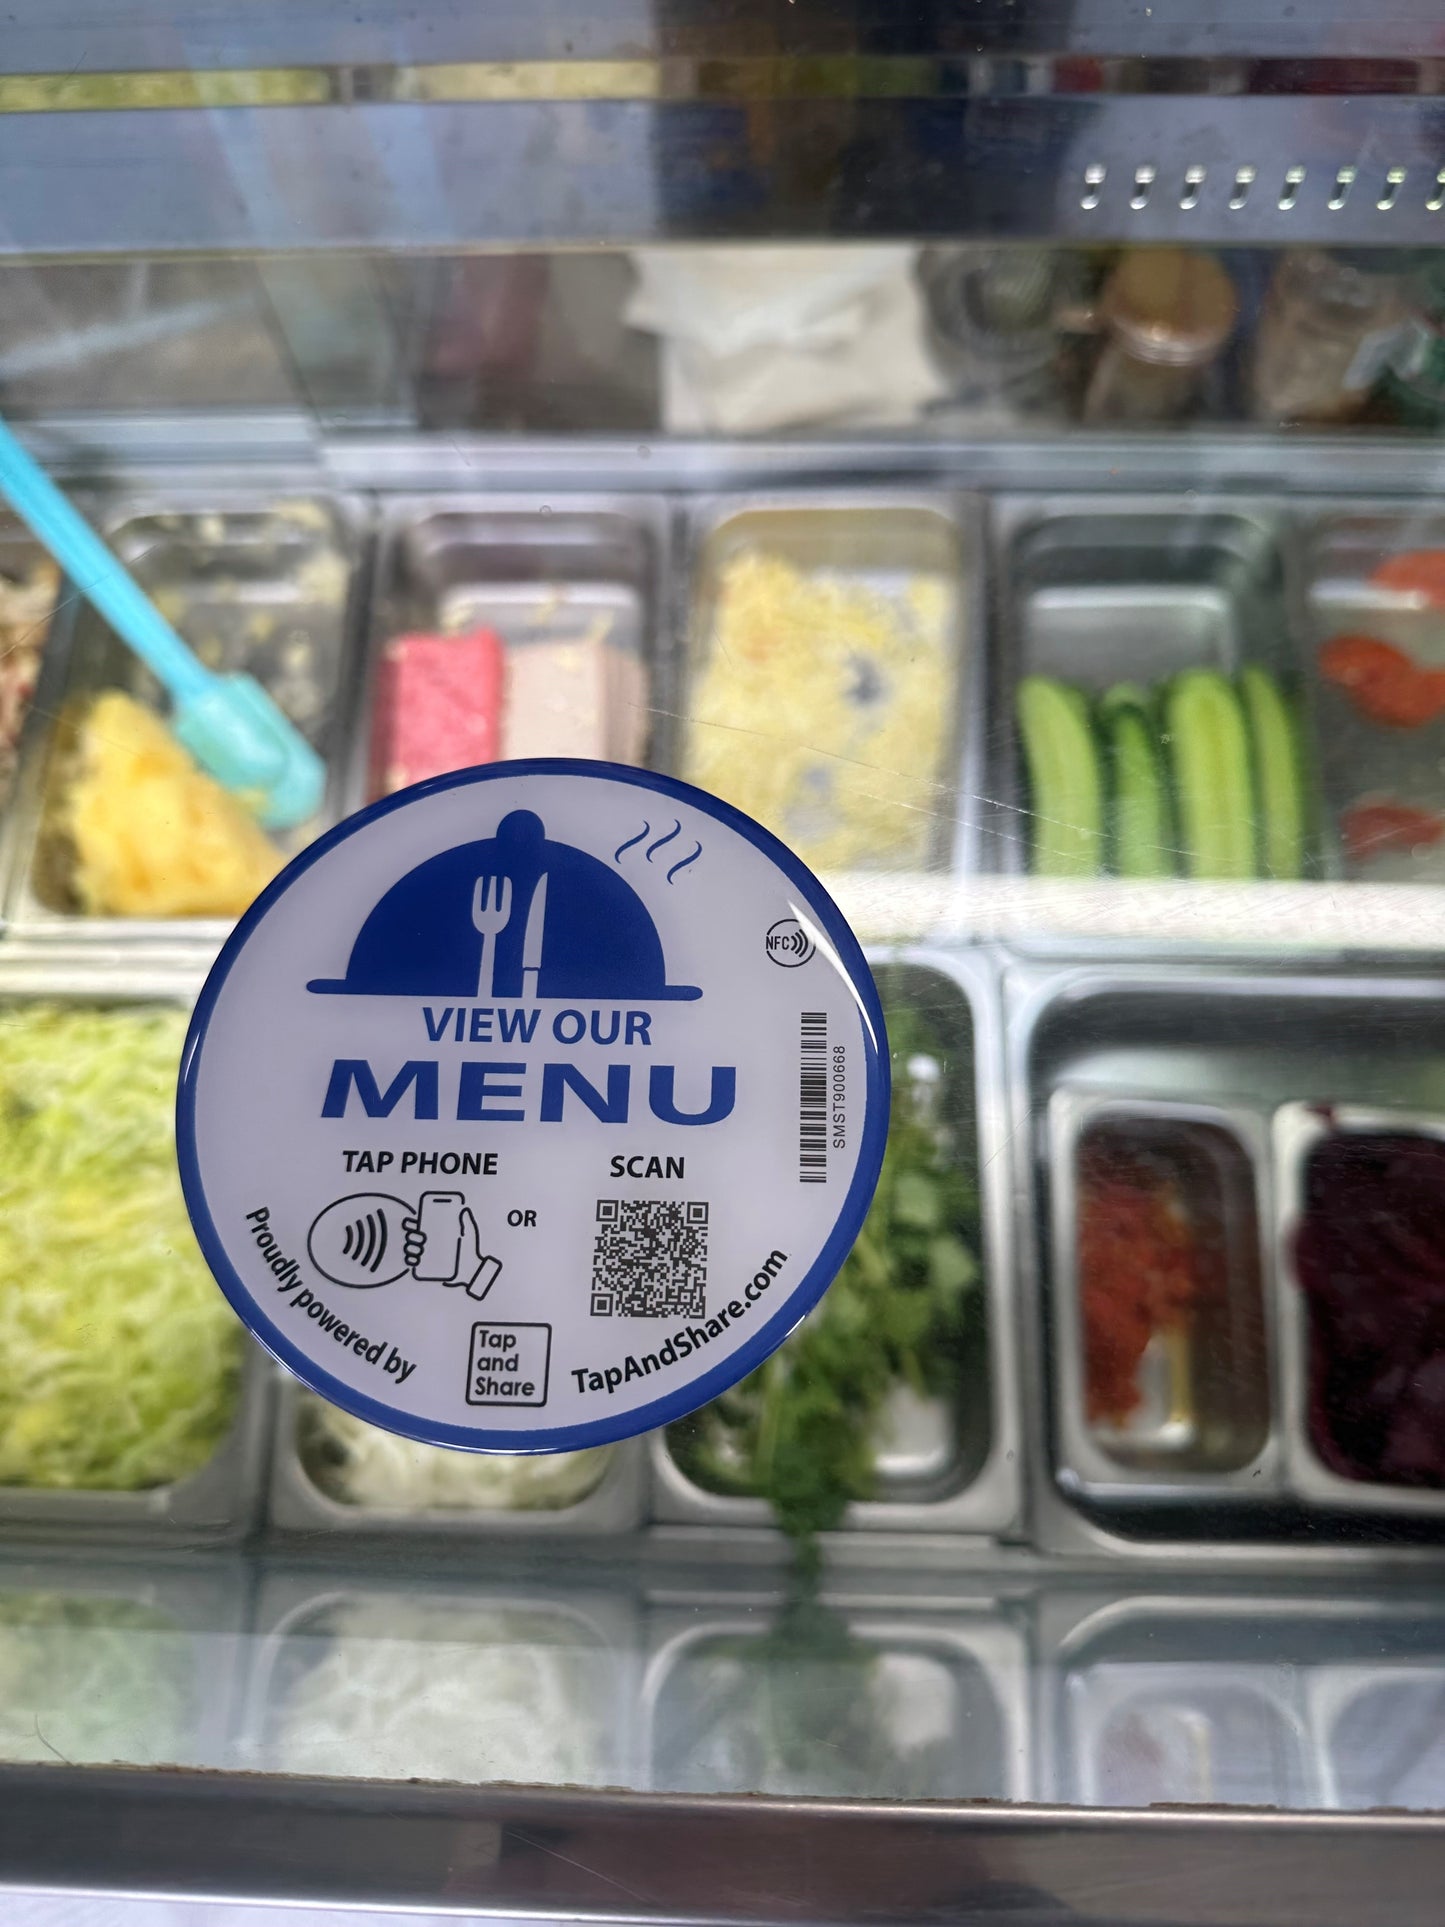 Tap and Share Contactless Sharing Smart NFC 'View our Menu' Epoxy Sticker + QR code